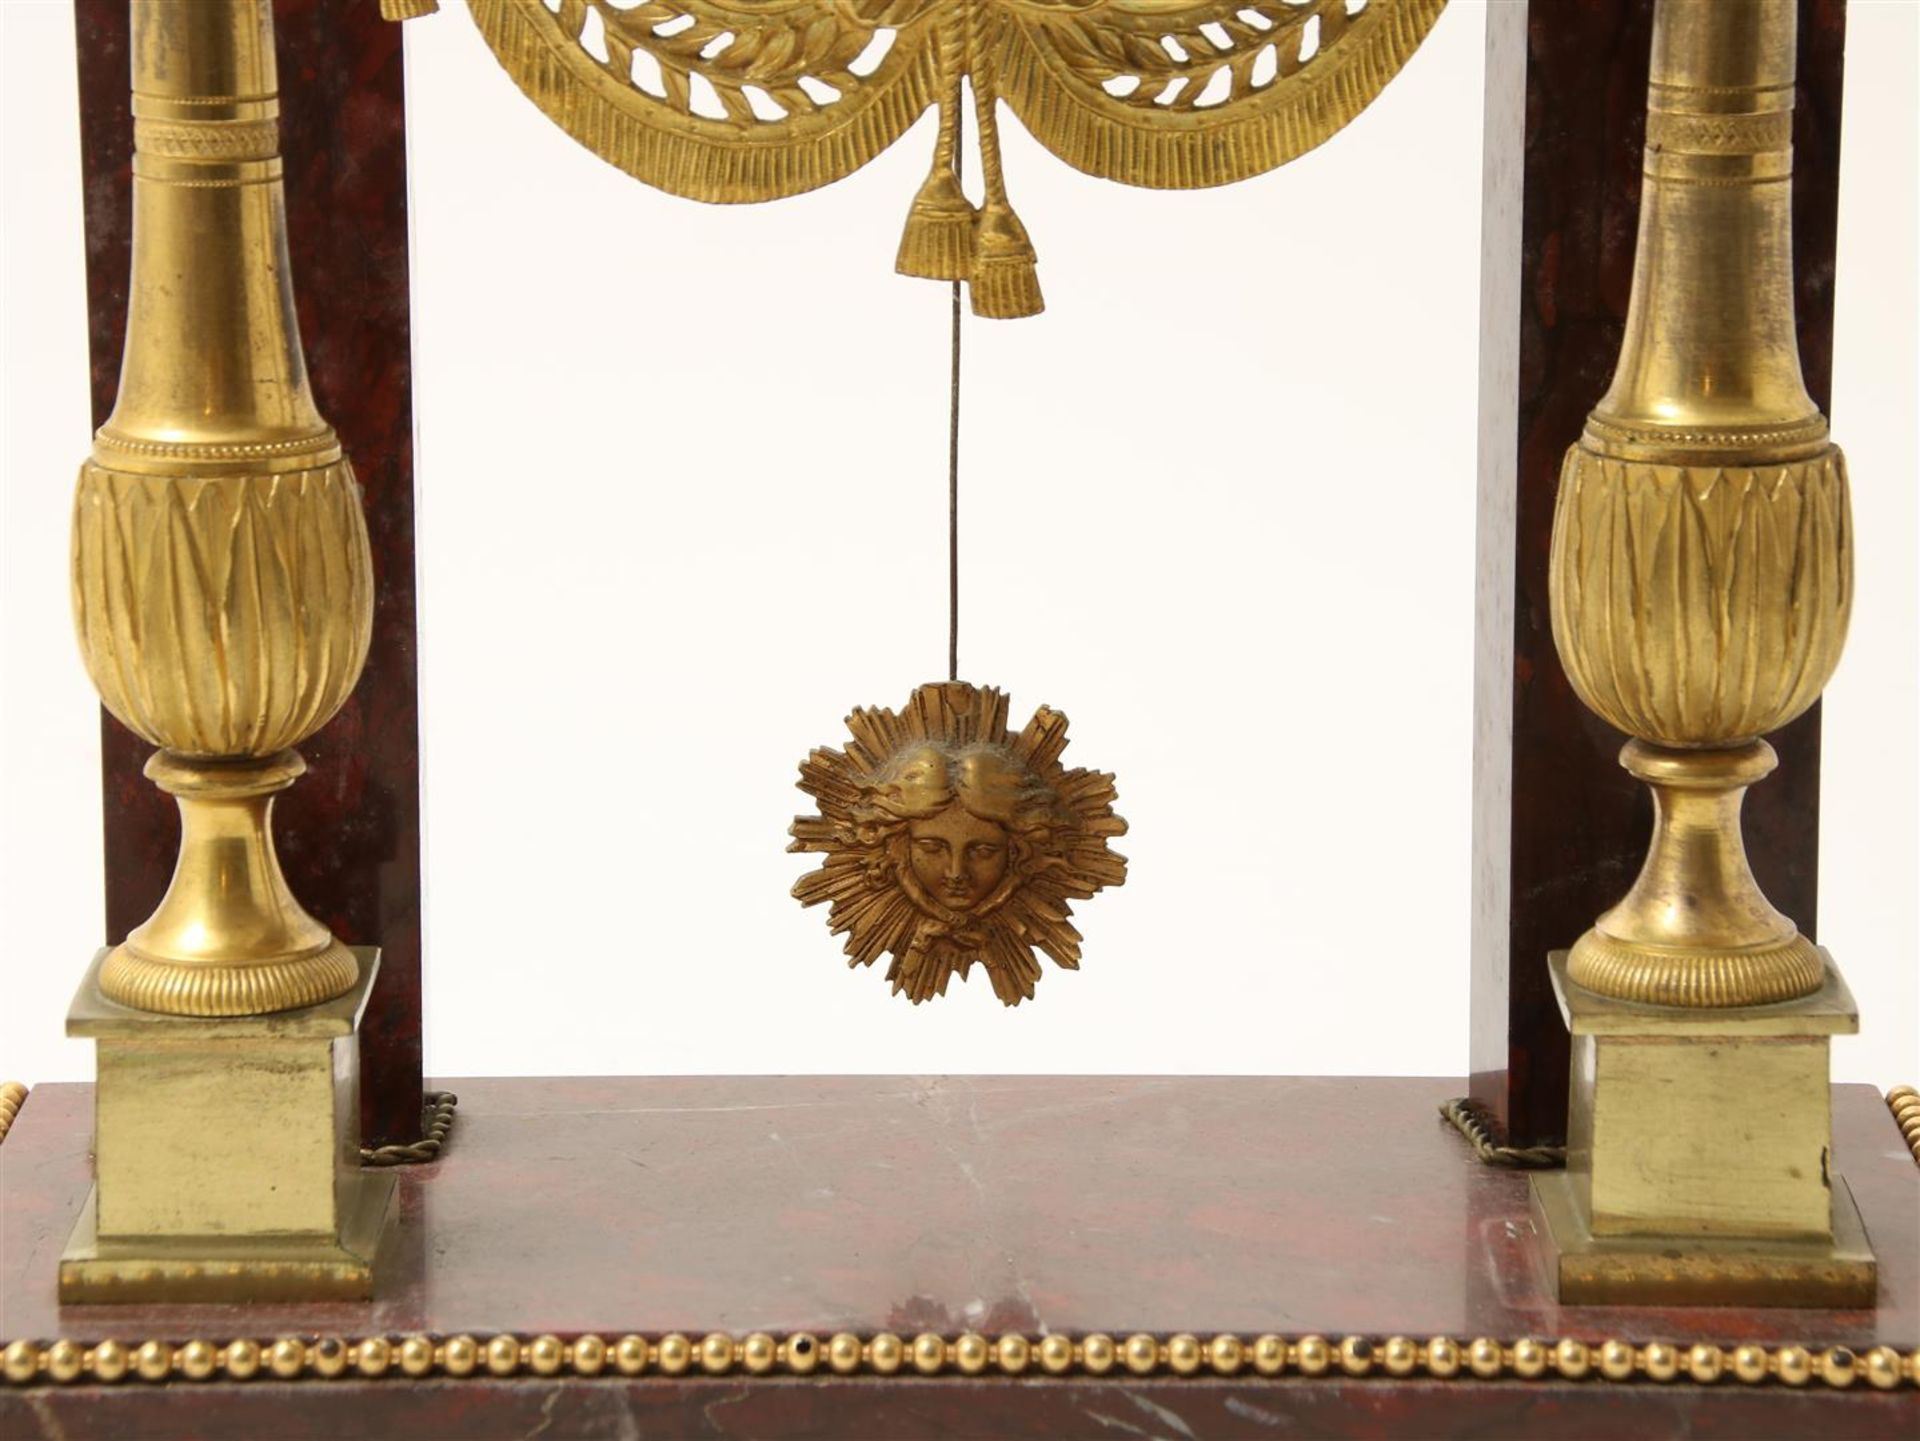 Red marble -Griotte marble- Empire portal mantel clock (Pendule portique) with ormolu ornaments, - Image 4 of 5